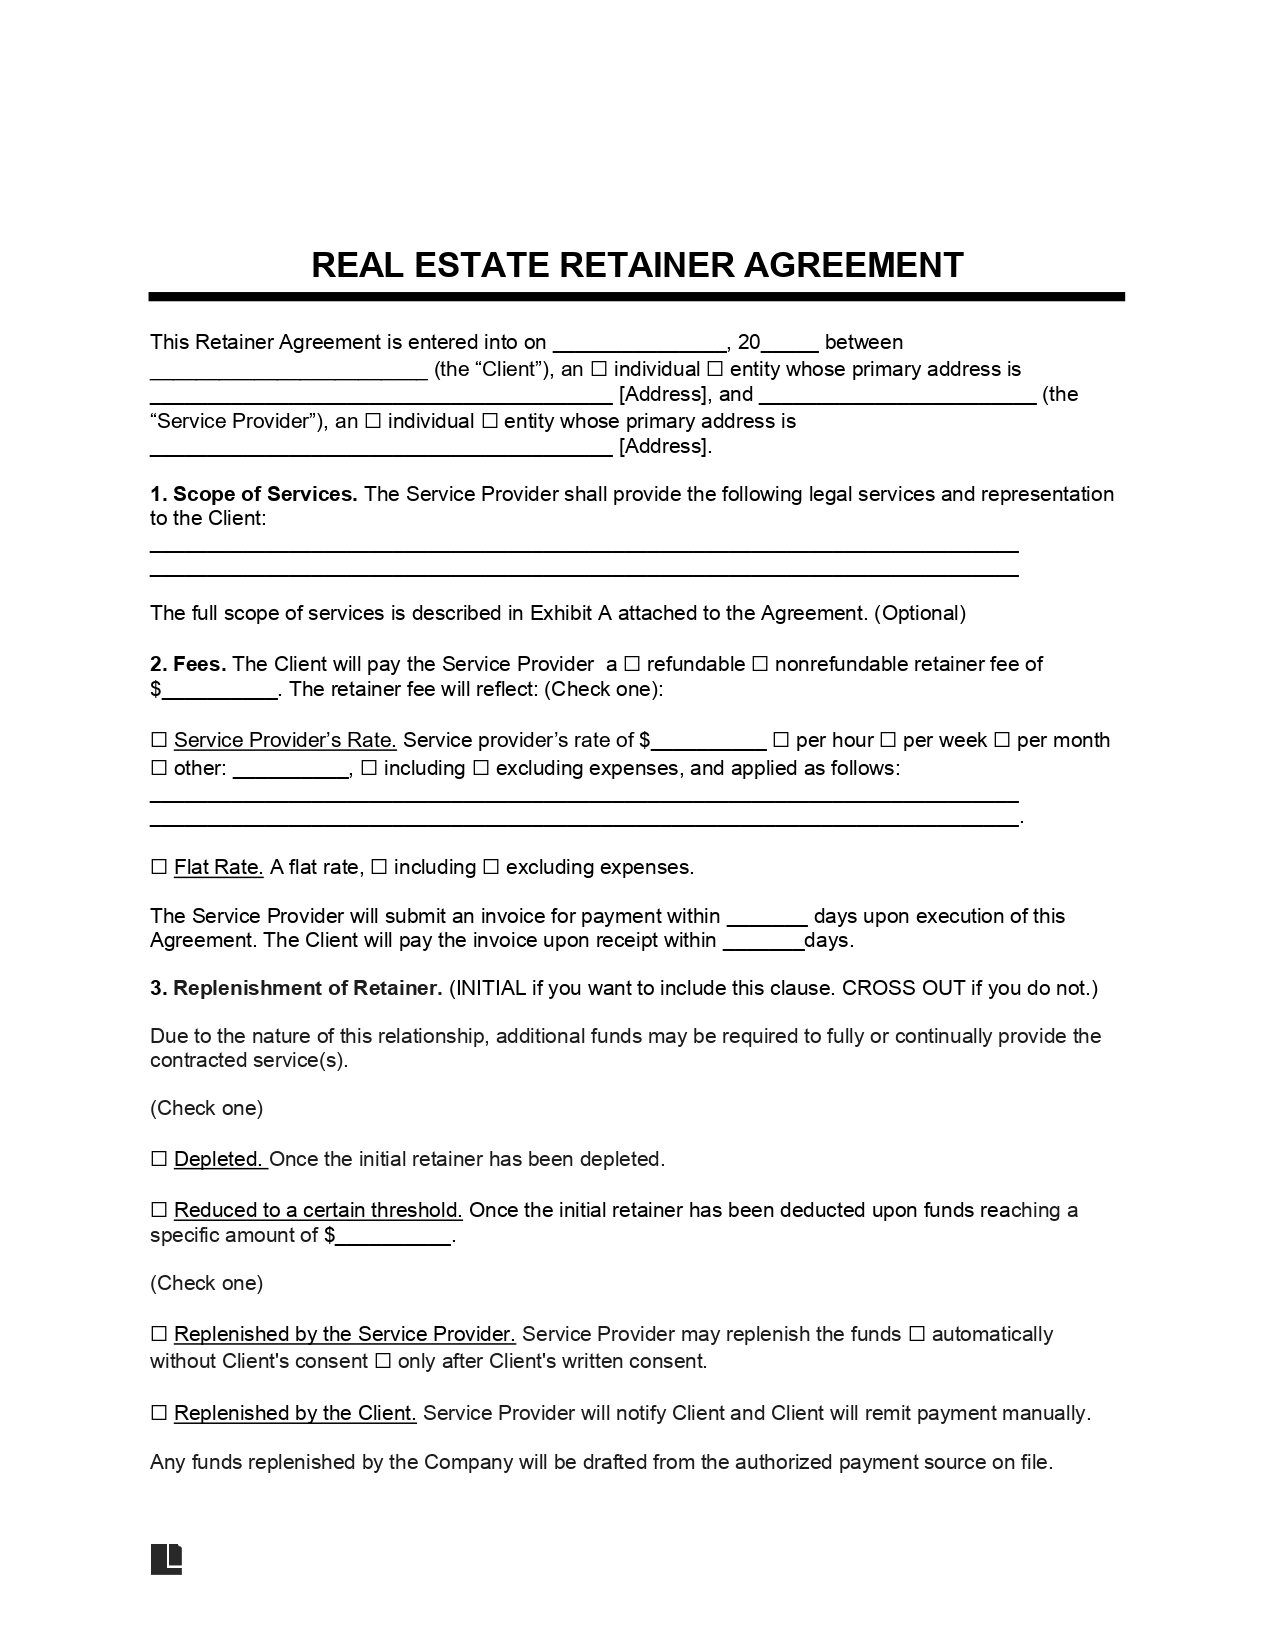 Real Estate Retainer Agreement